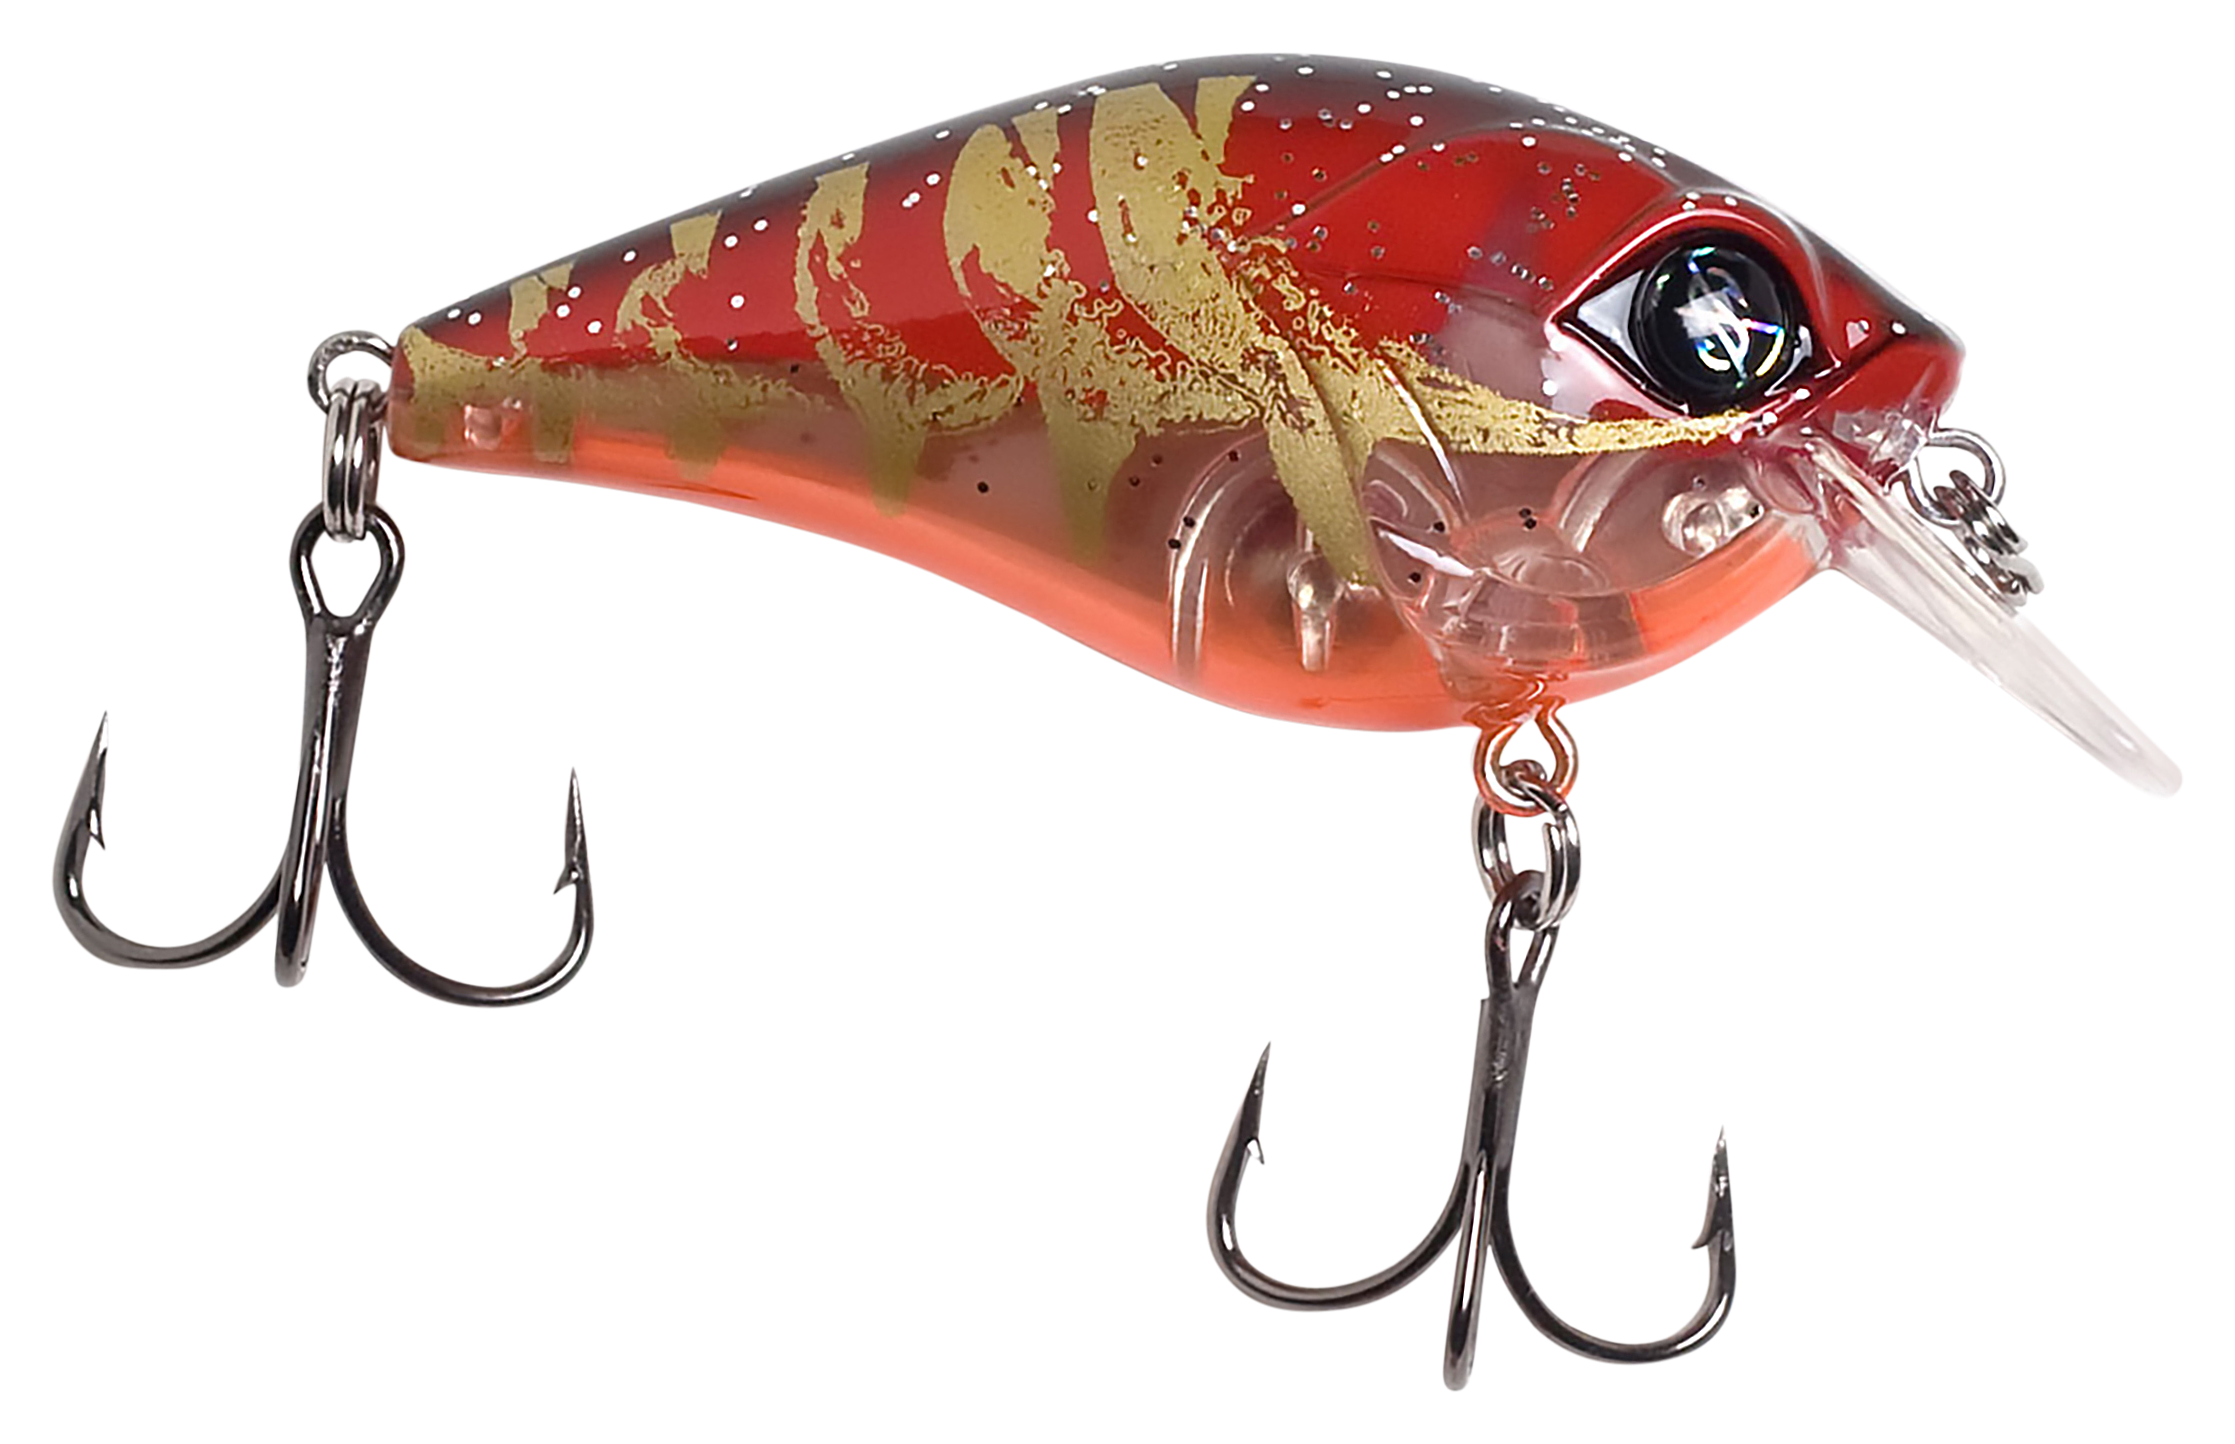 square bill crankbait, square bill crankbait Suppliers and